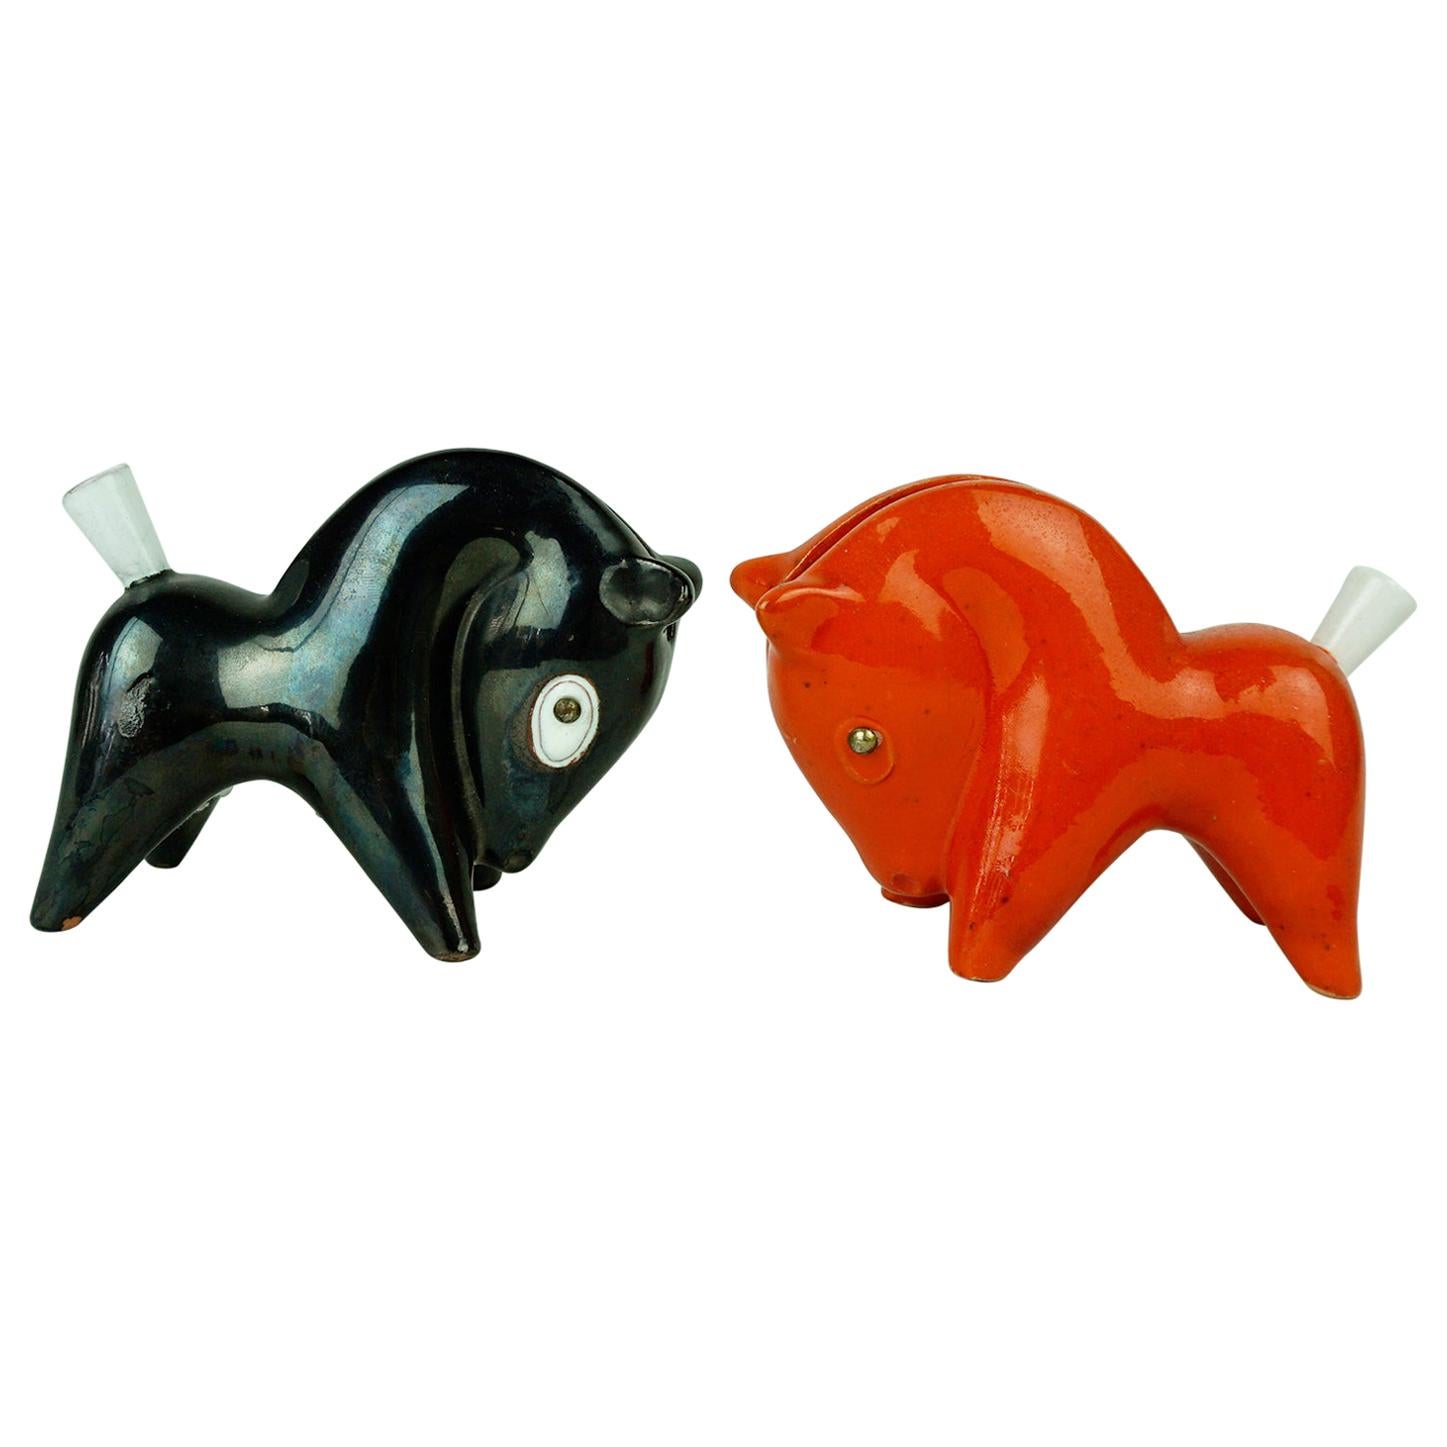 Pair of Austrian Midcentury Ceramic Toothpick Horses by Leopold Anzengruber